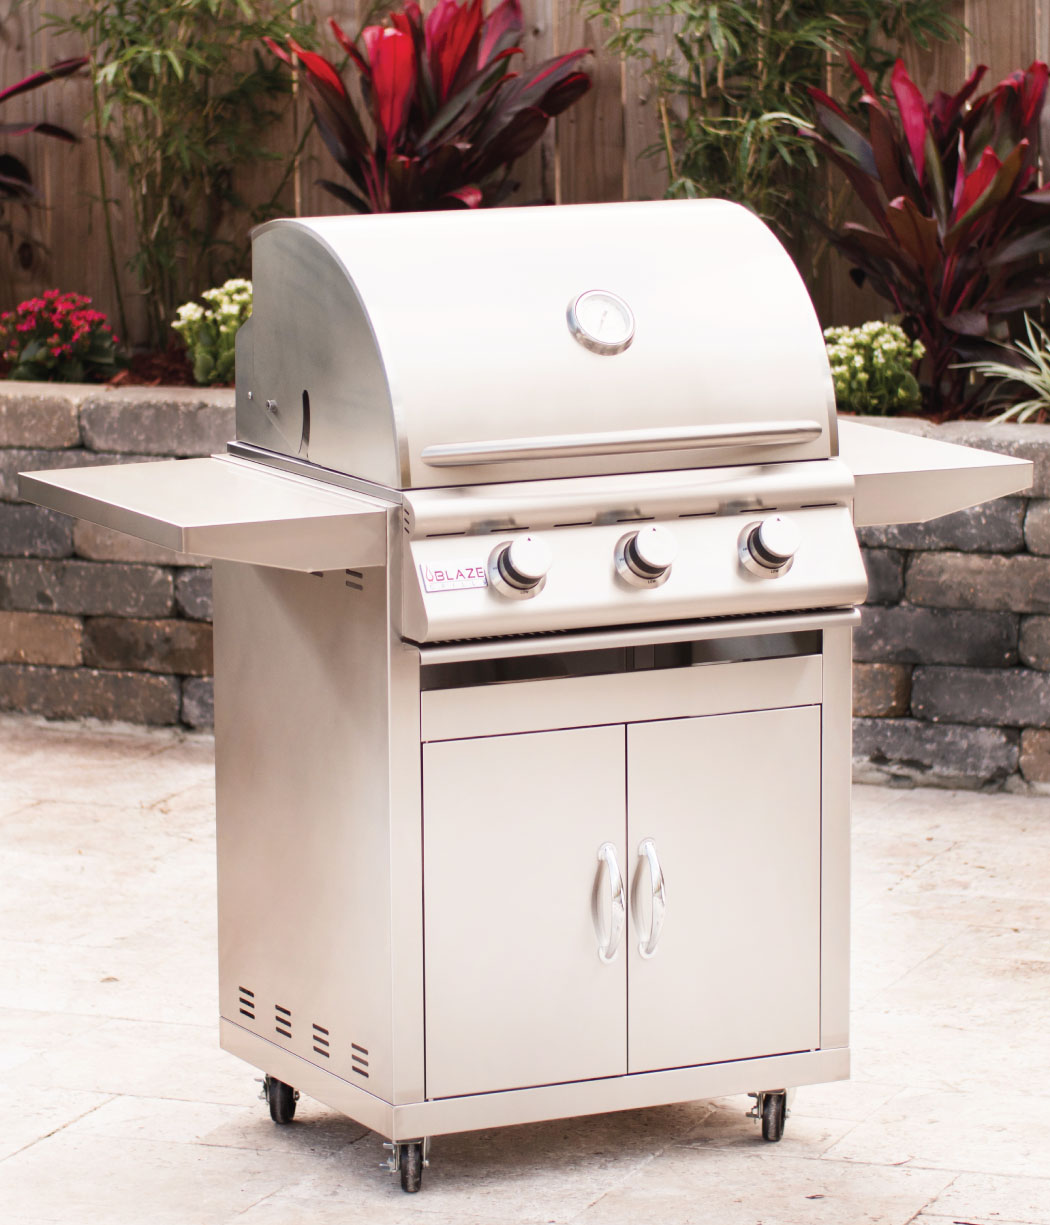 blaze freestanding grill | Godby Hearth and Home